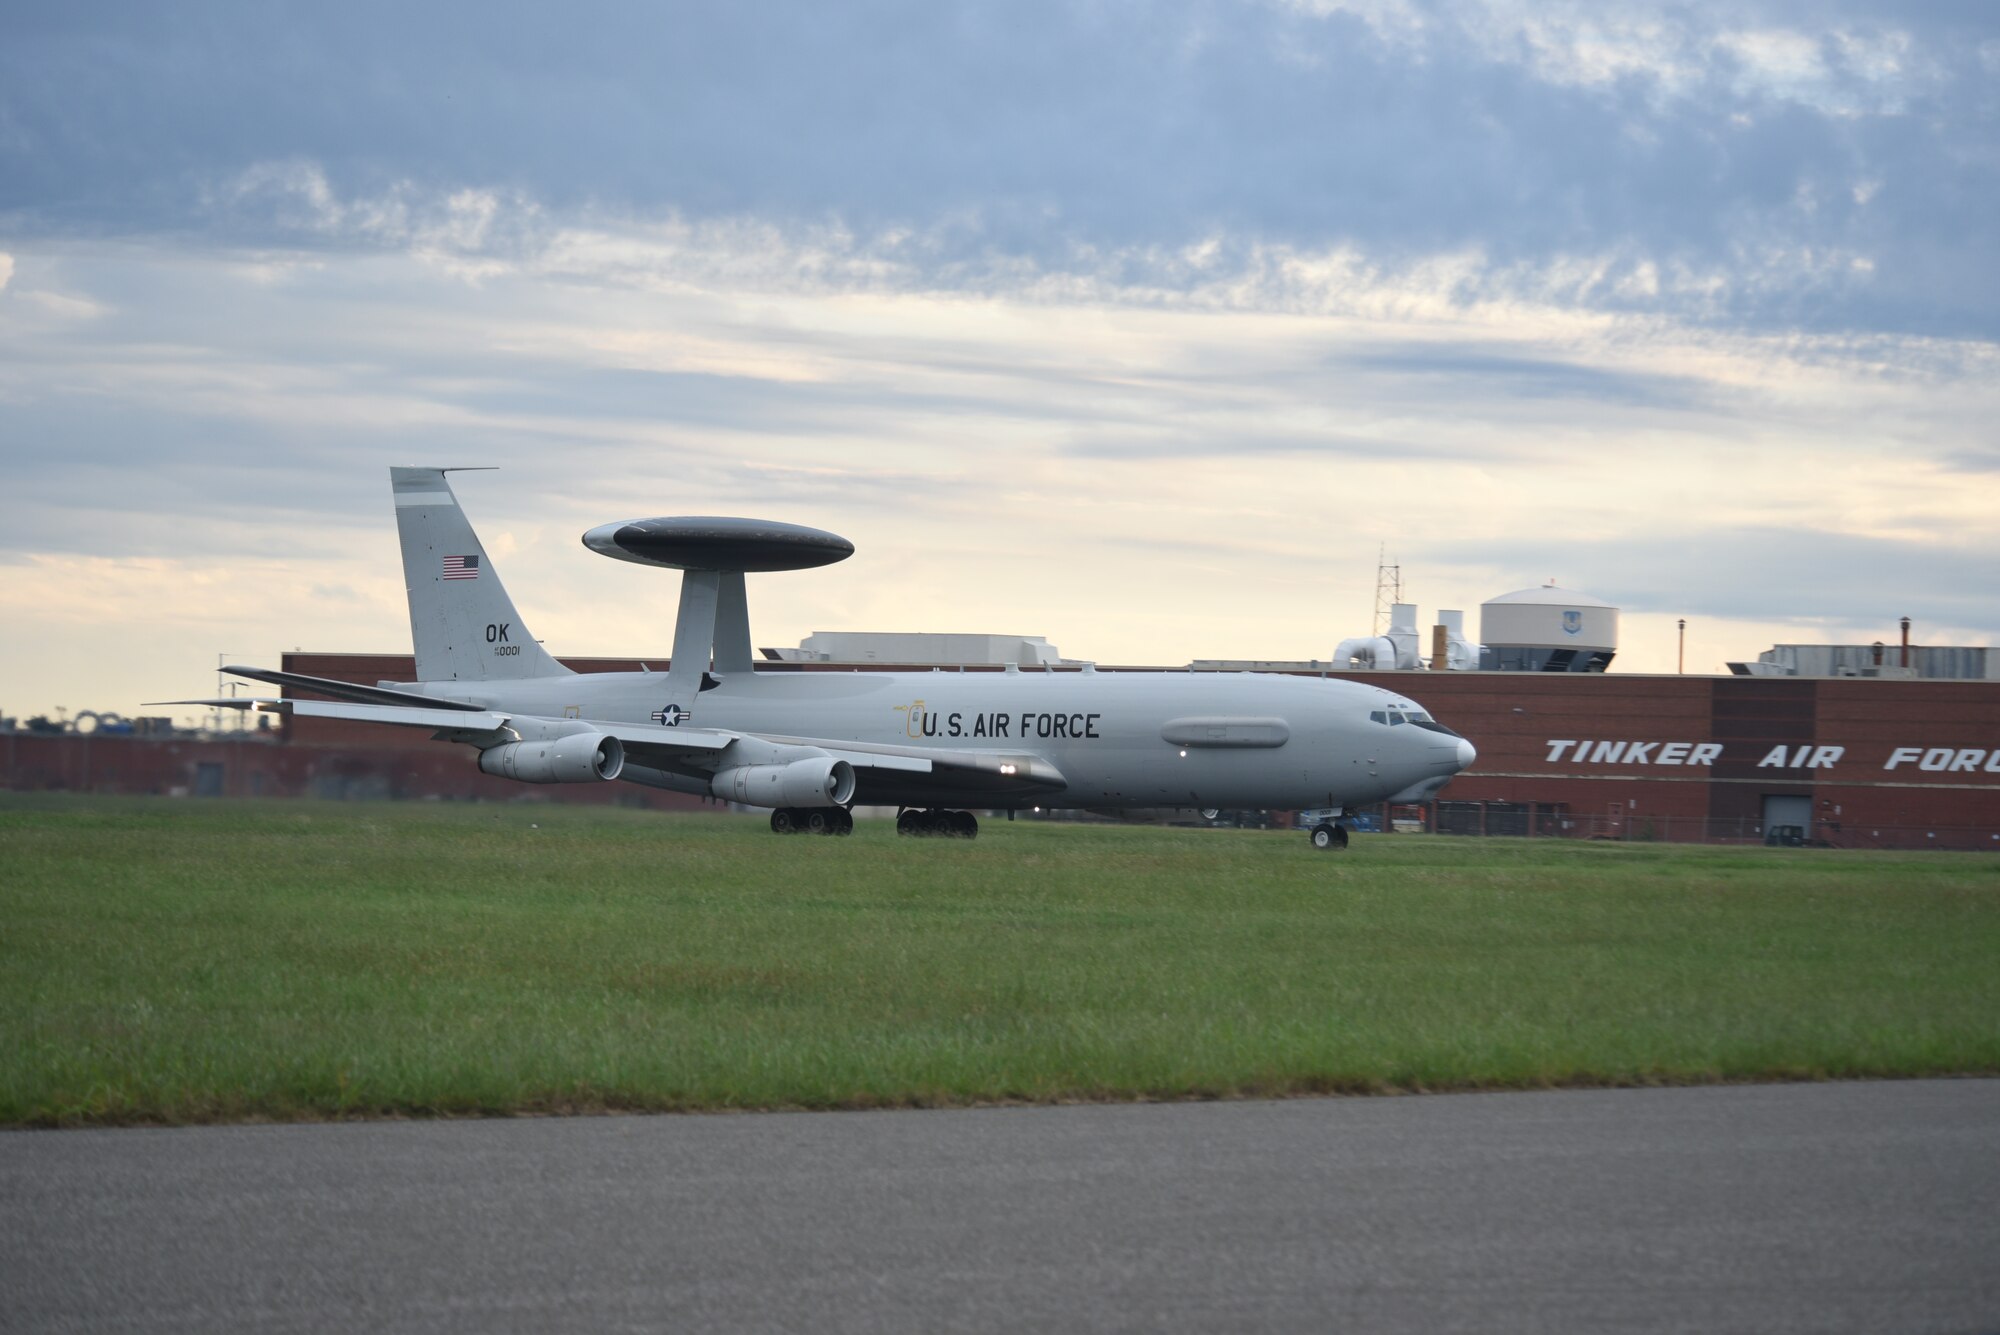 An E-3 Sentry aircraft from the 552nd Air Control Wing’s 960th Airborne Air Control Squadron launched out of Tinker Air Force Base Saturday morning in support of Hurricane Florence relief efforts. The aircraft, with a crew of 19, will be on station for an extended period flying off the coast of North Carolina.